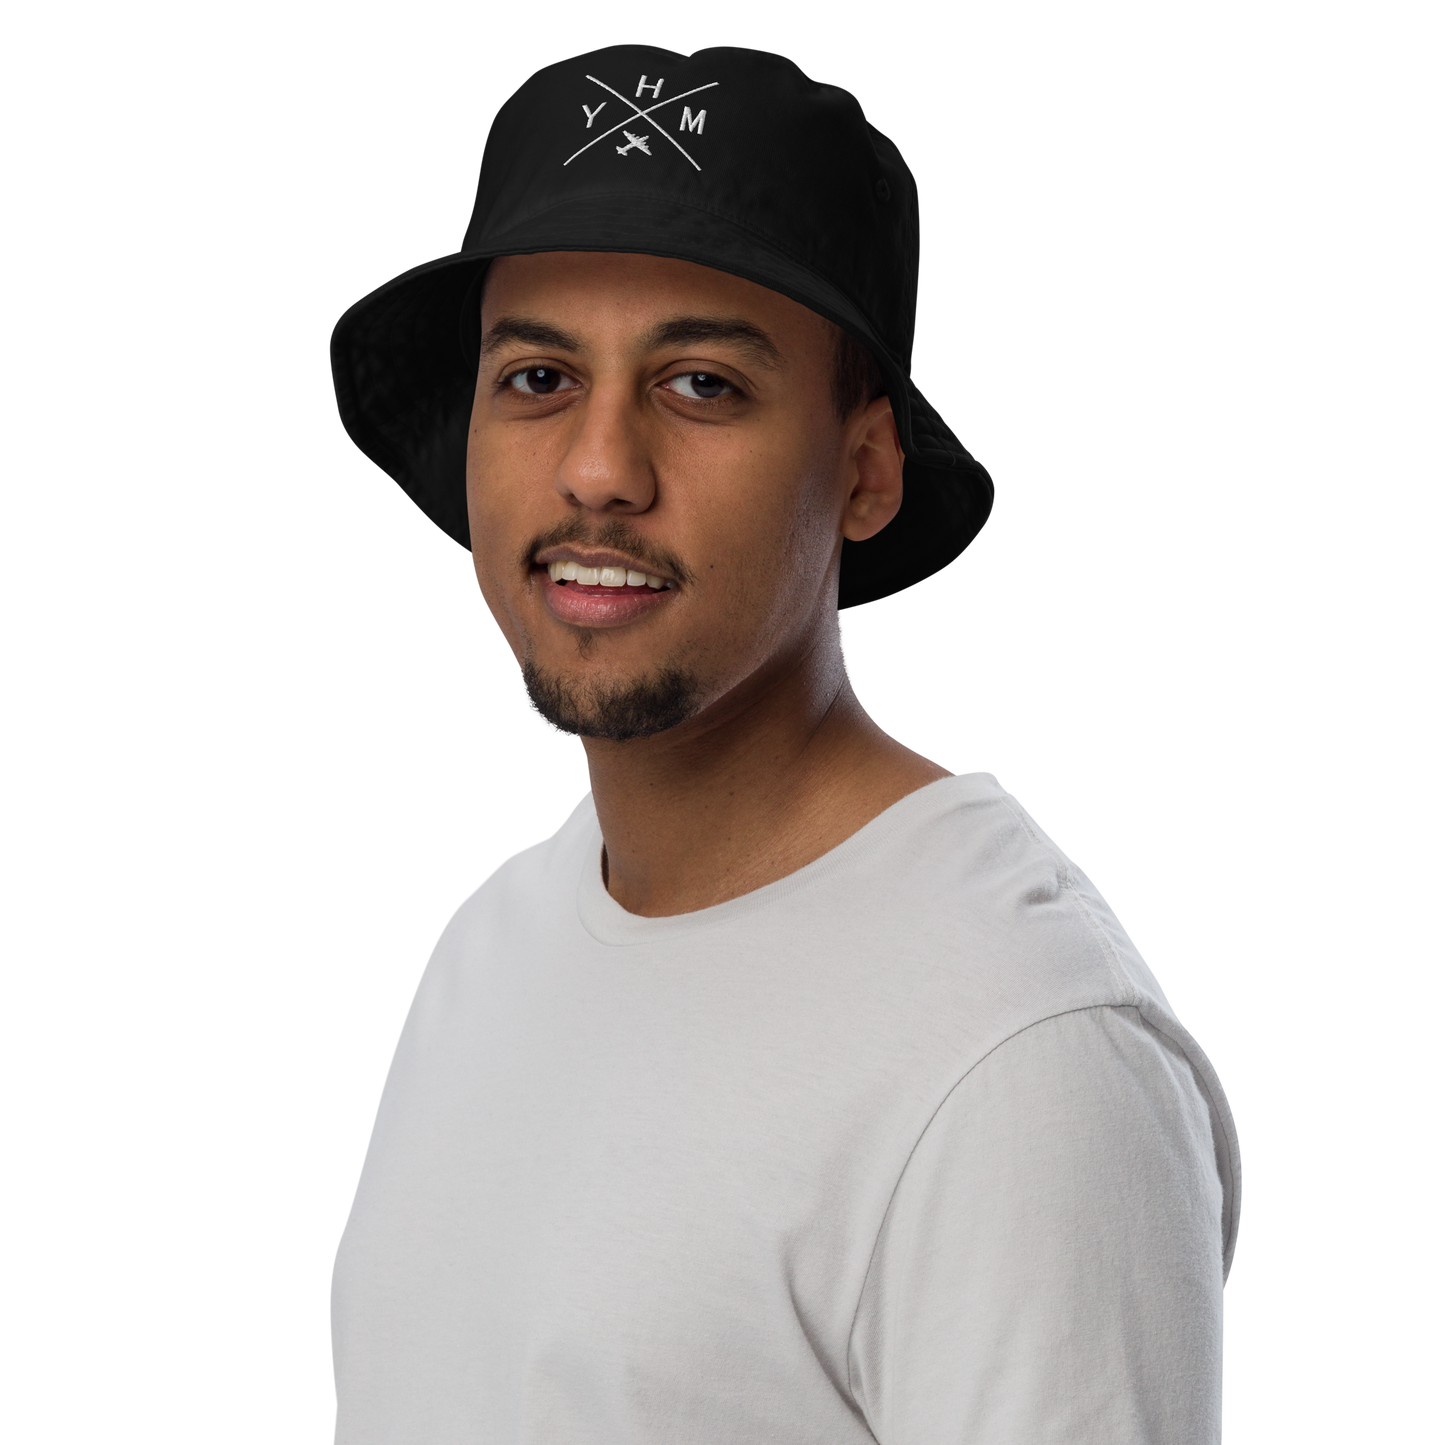 YHM Designs - YHM Hamilton Organic Cotton Bucket Hat - Crossed-X Design with Airport Code and Vintage Propliner - White Embroidery - Image 05